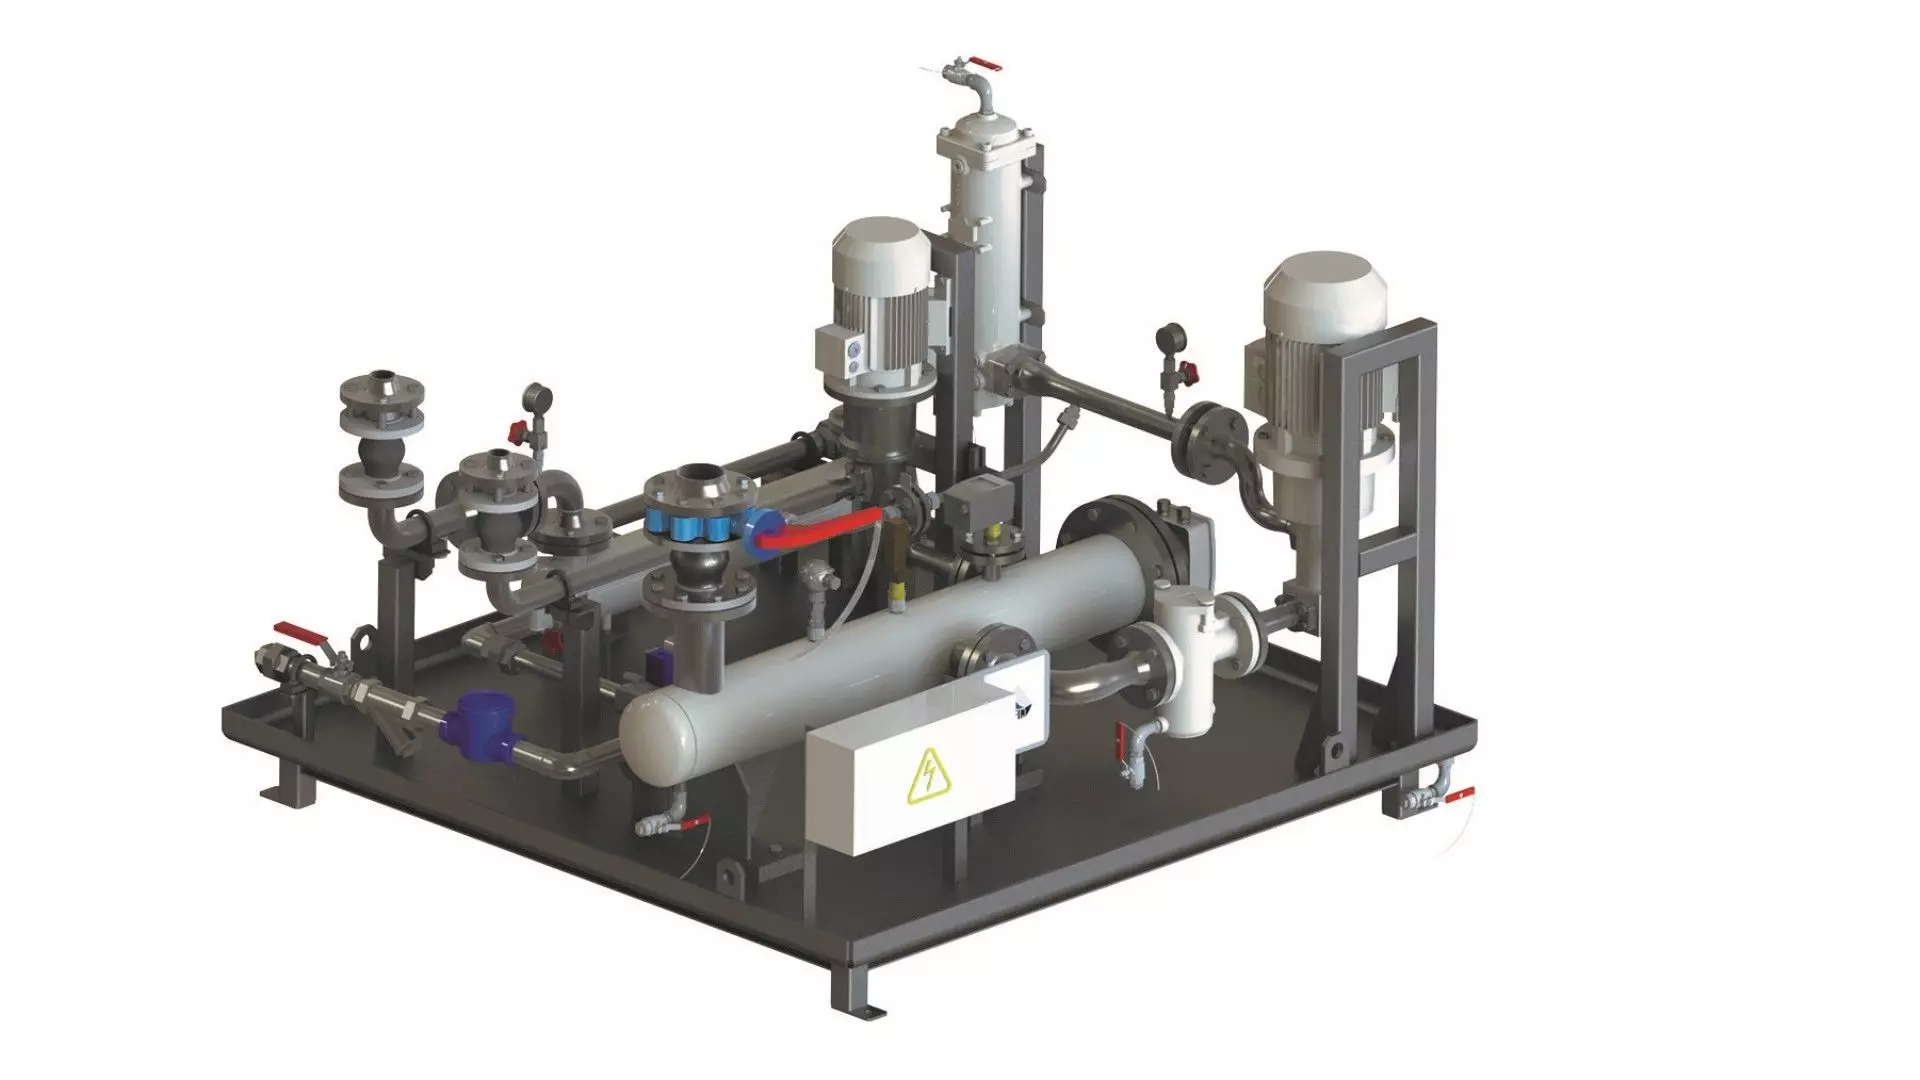 Lubrication system with main pump, filter and cooler